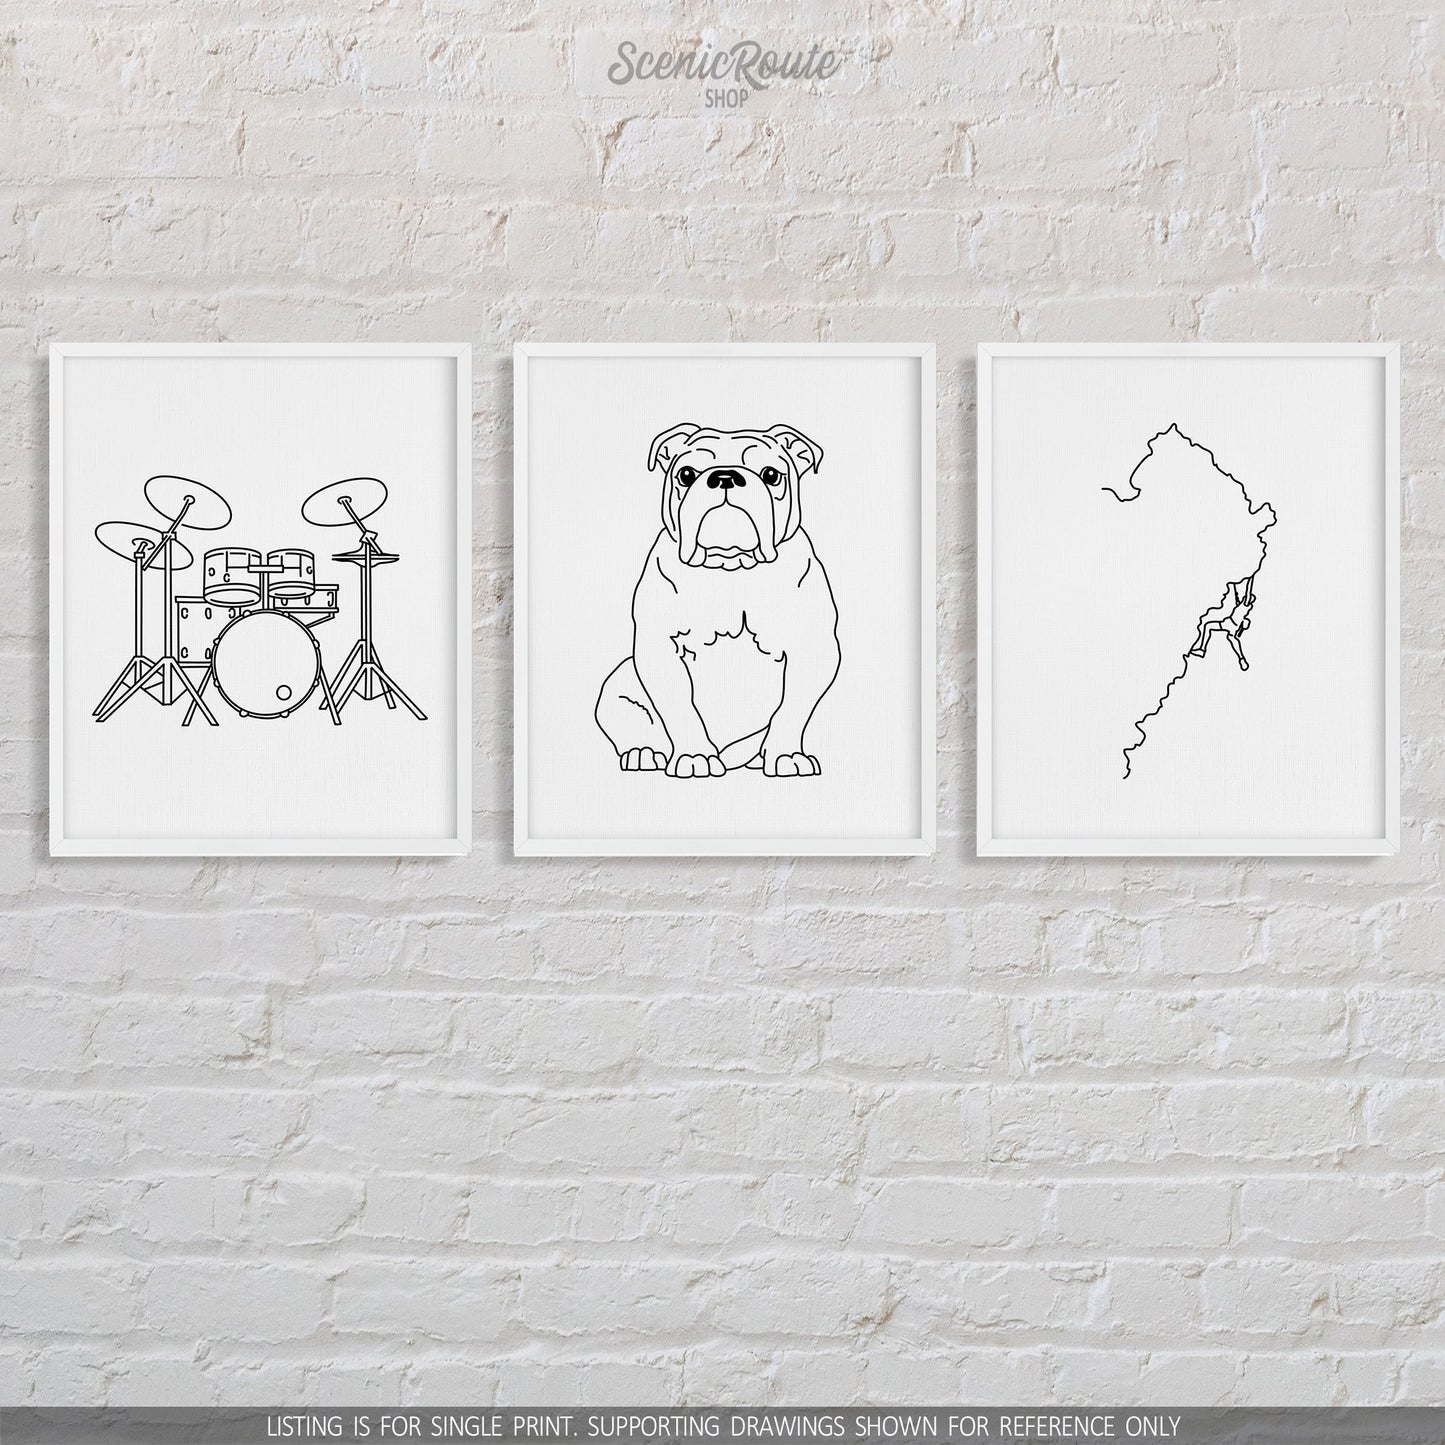 A group of three framed drawings on a brick wall.  The line art drawings include a set of Drums, a Bulldog, and a person Rock Climbing